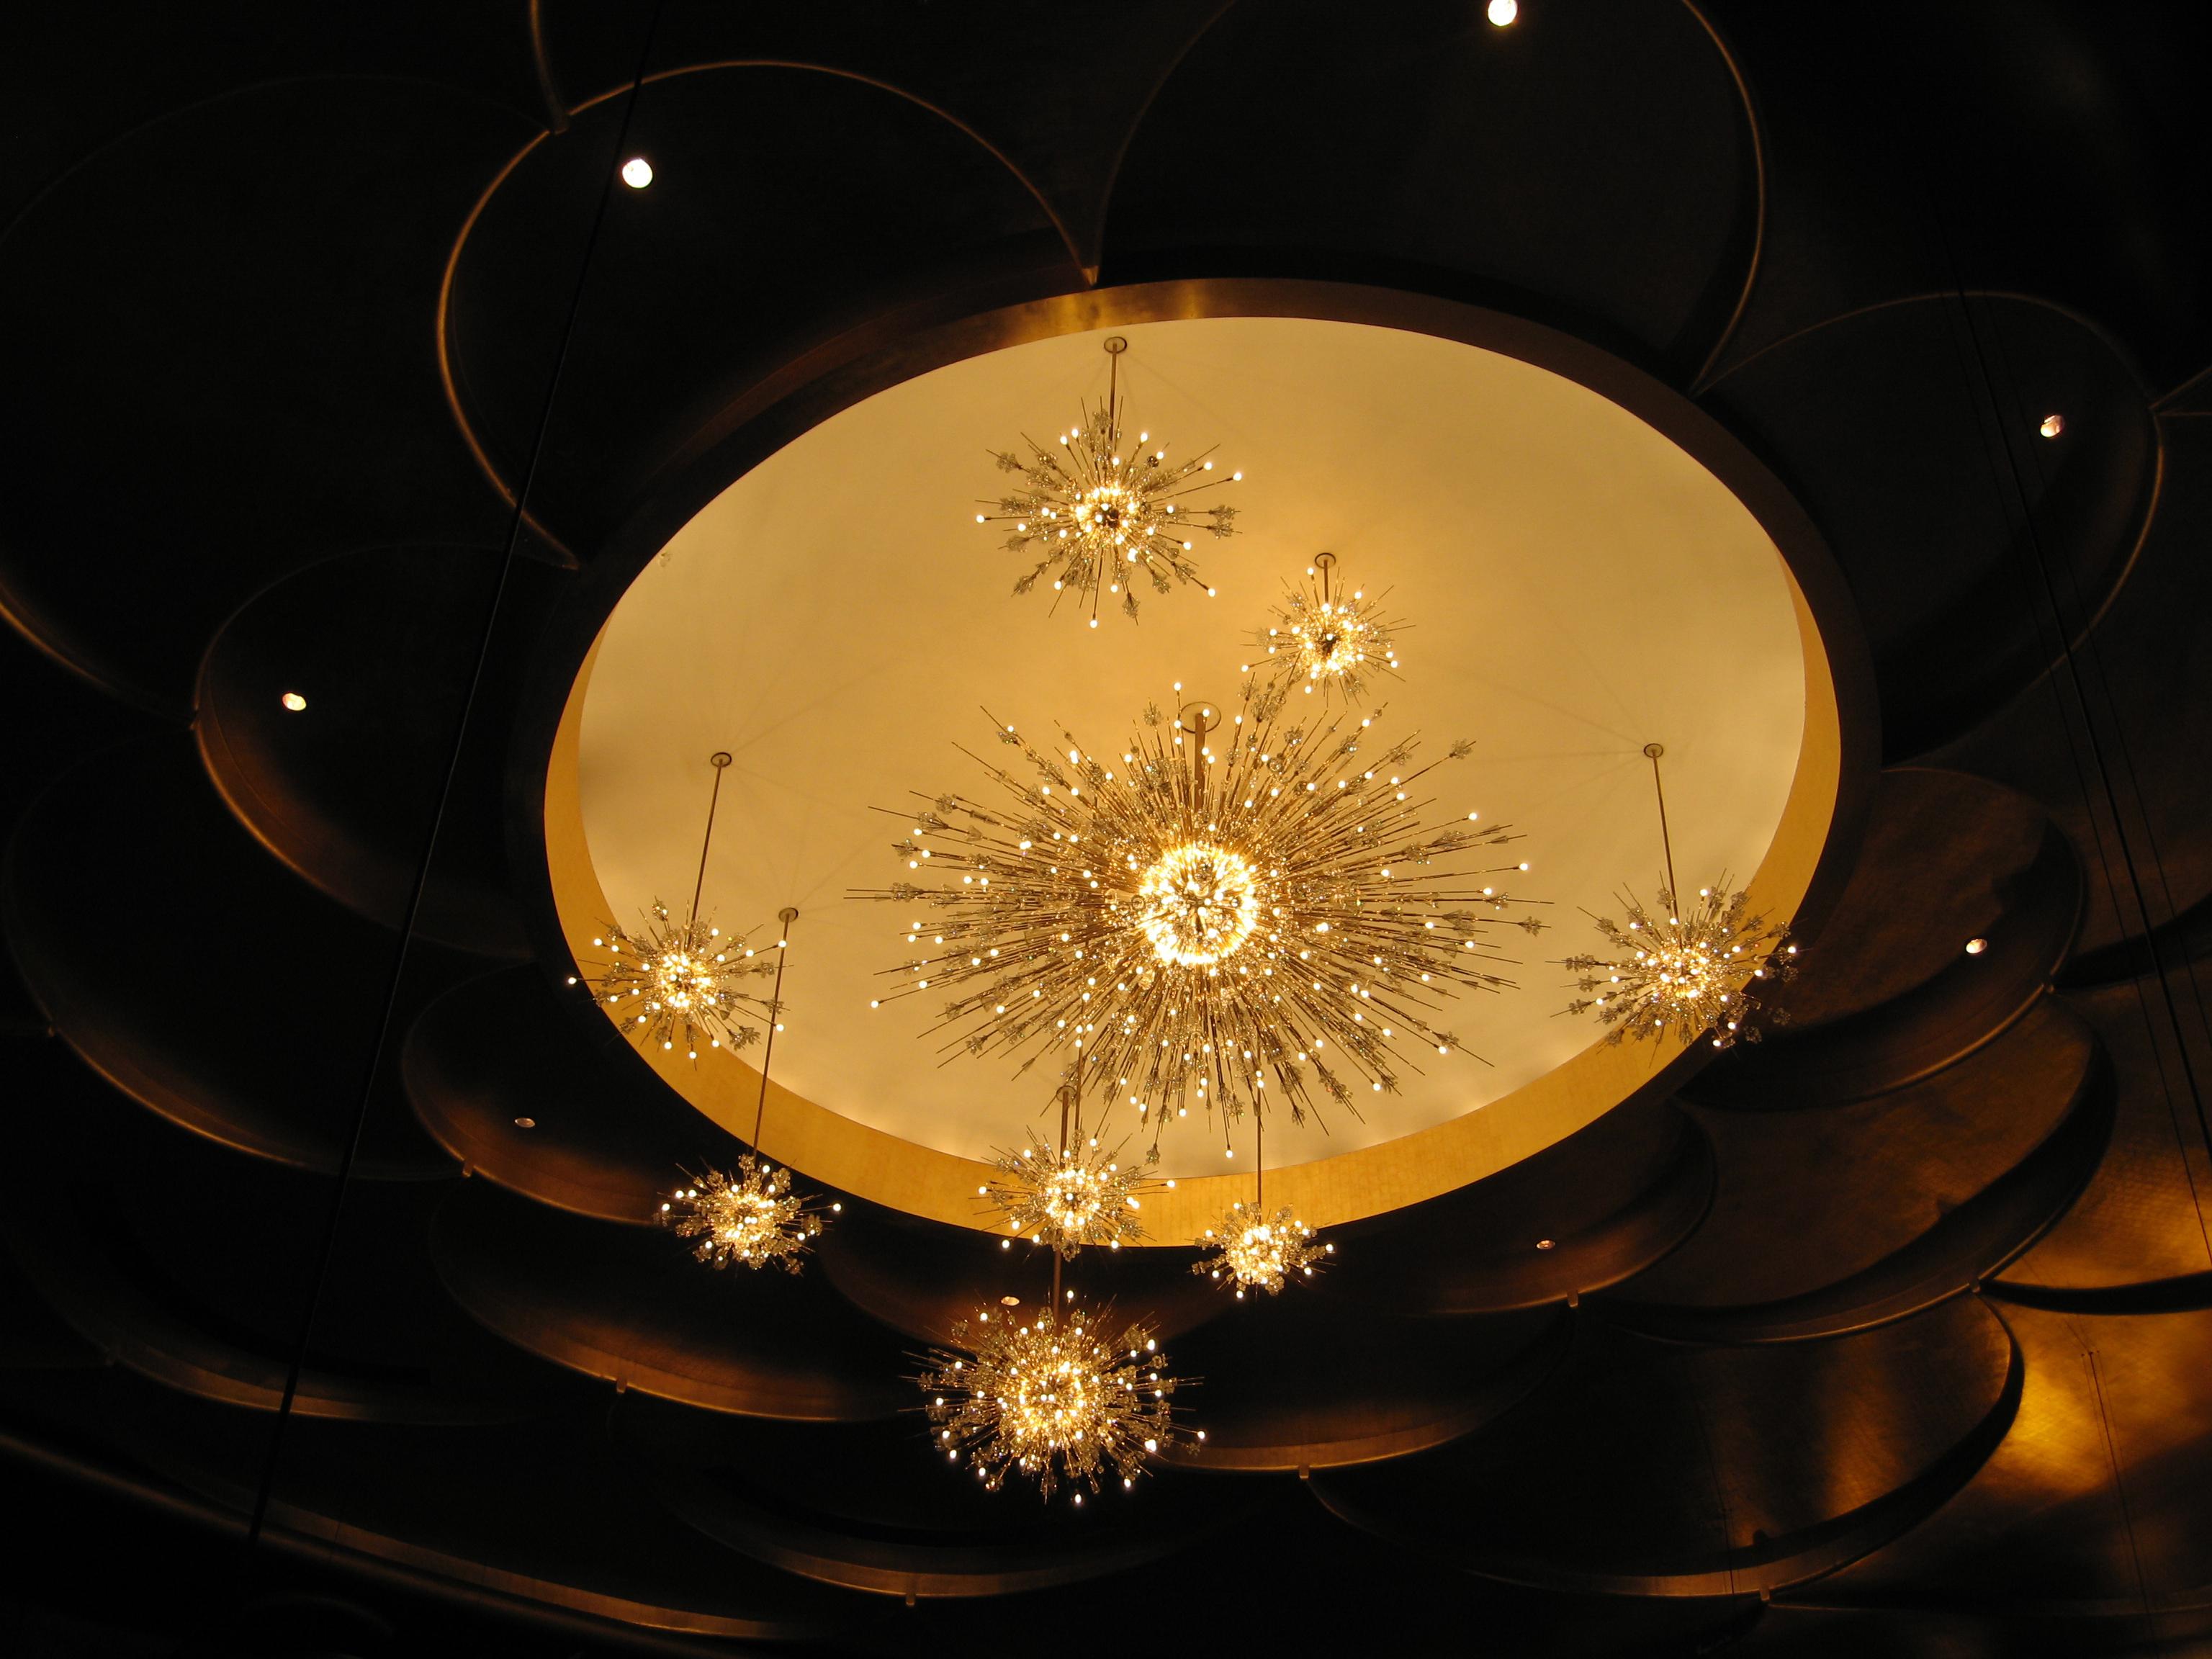 Lobmeyr Metropolitan Opera Crystal Chandelier Auditorium 6660-C-16 In New Condition For Sale In New York, NY